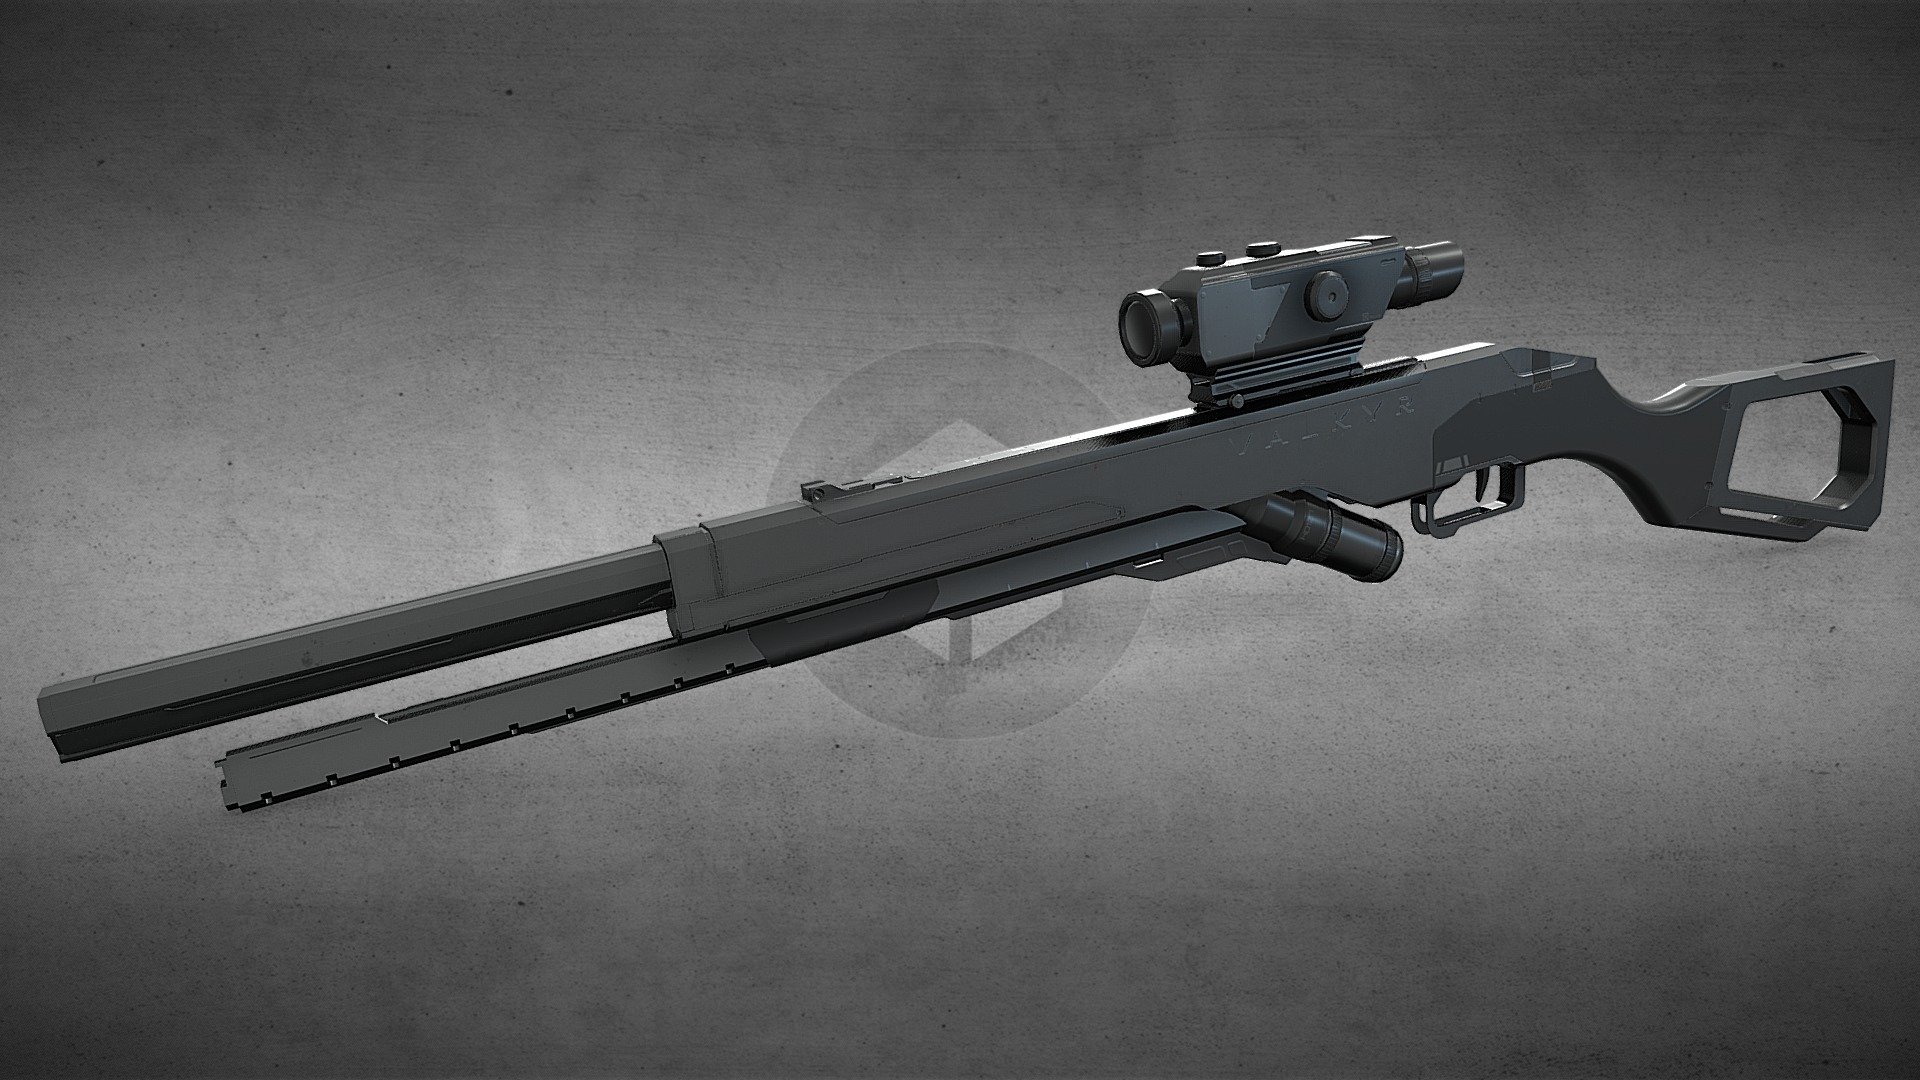 This rifle is a model that I created during the hard surface game asset course provided by Blender Bros 3d model